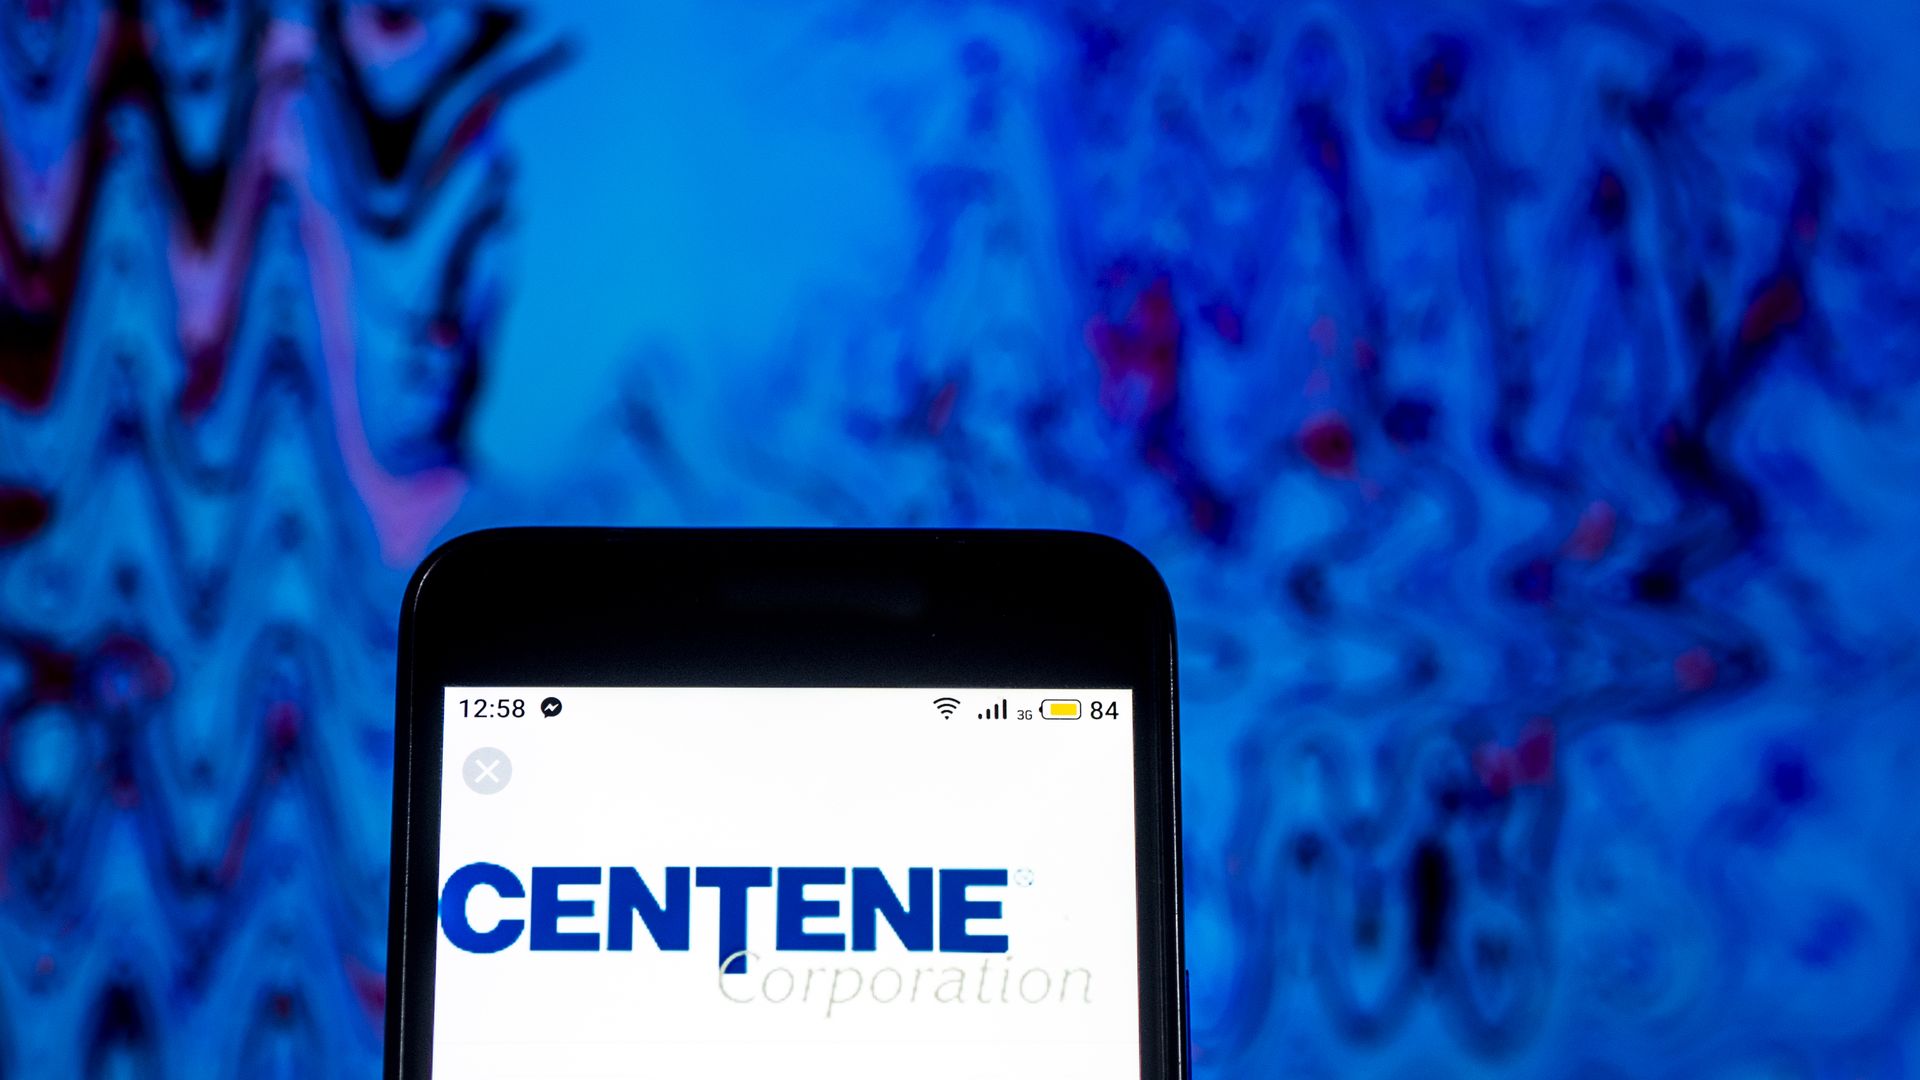 Centene logo on the screen of a smartphone.